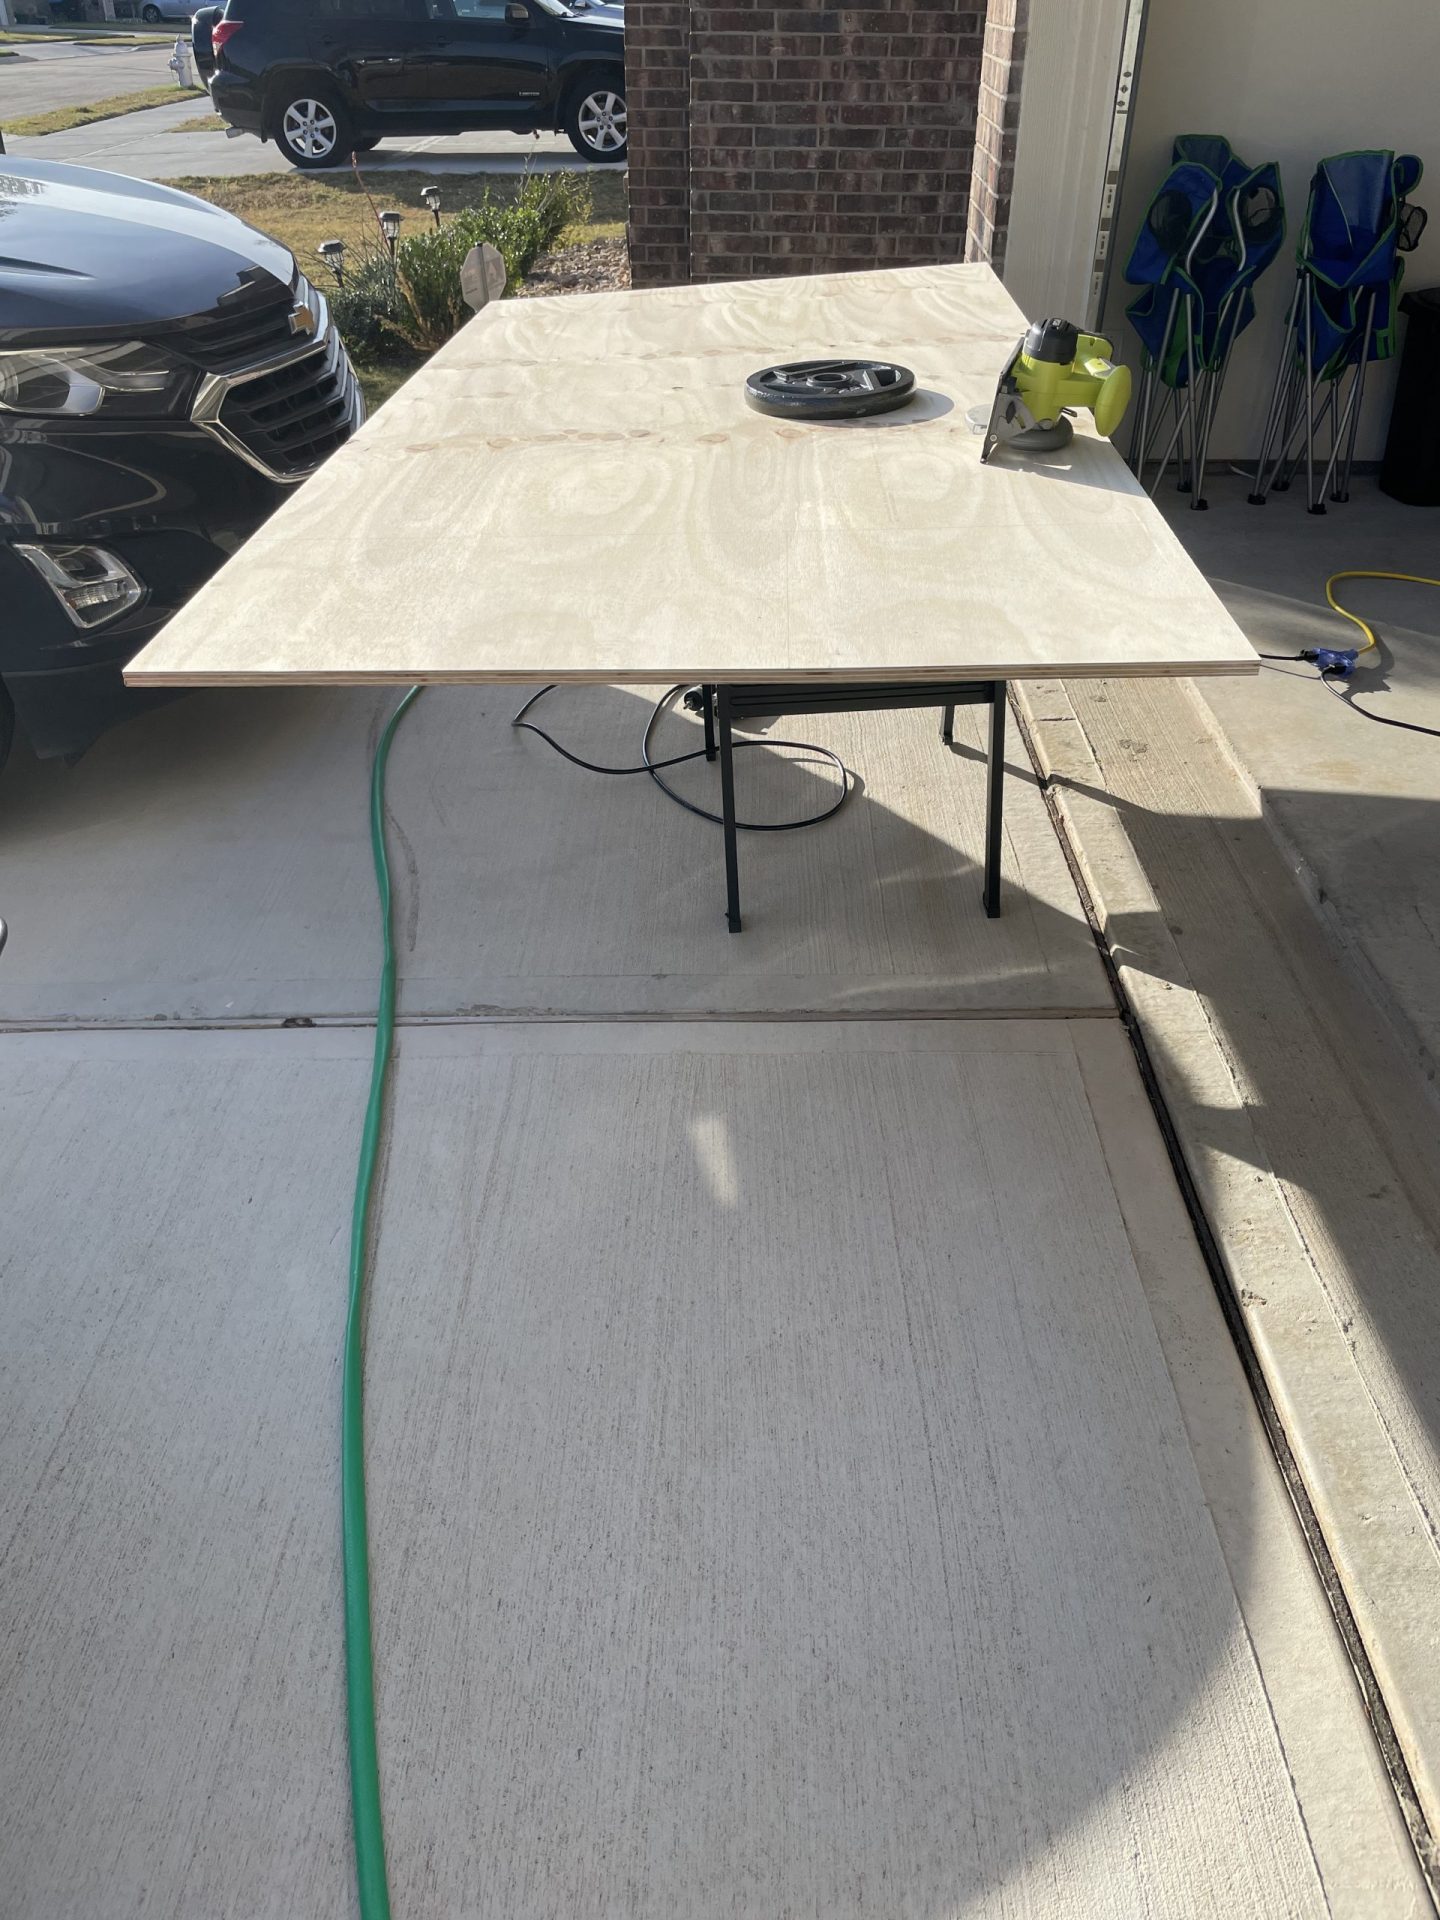 Trimming Plywood